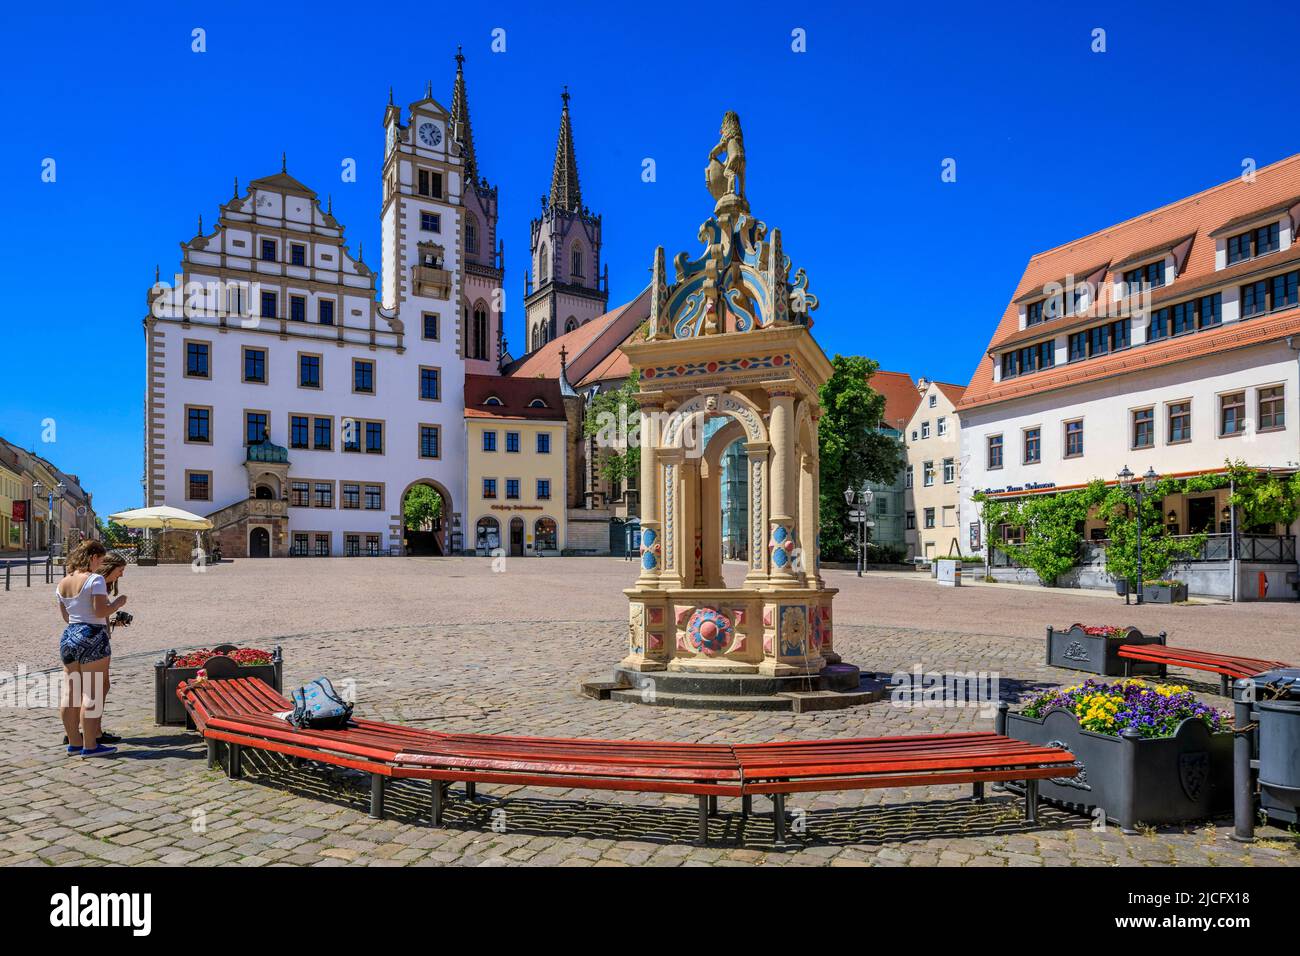 Markt Oschatz: Oschatz is located in a hilly area in the valley of the Döllnitz, which flows into the Elbe as a left tributary about 15 km further east near Riesa. Stock Photo